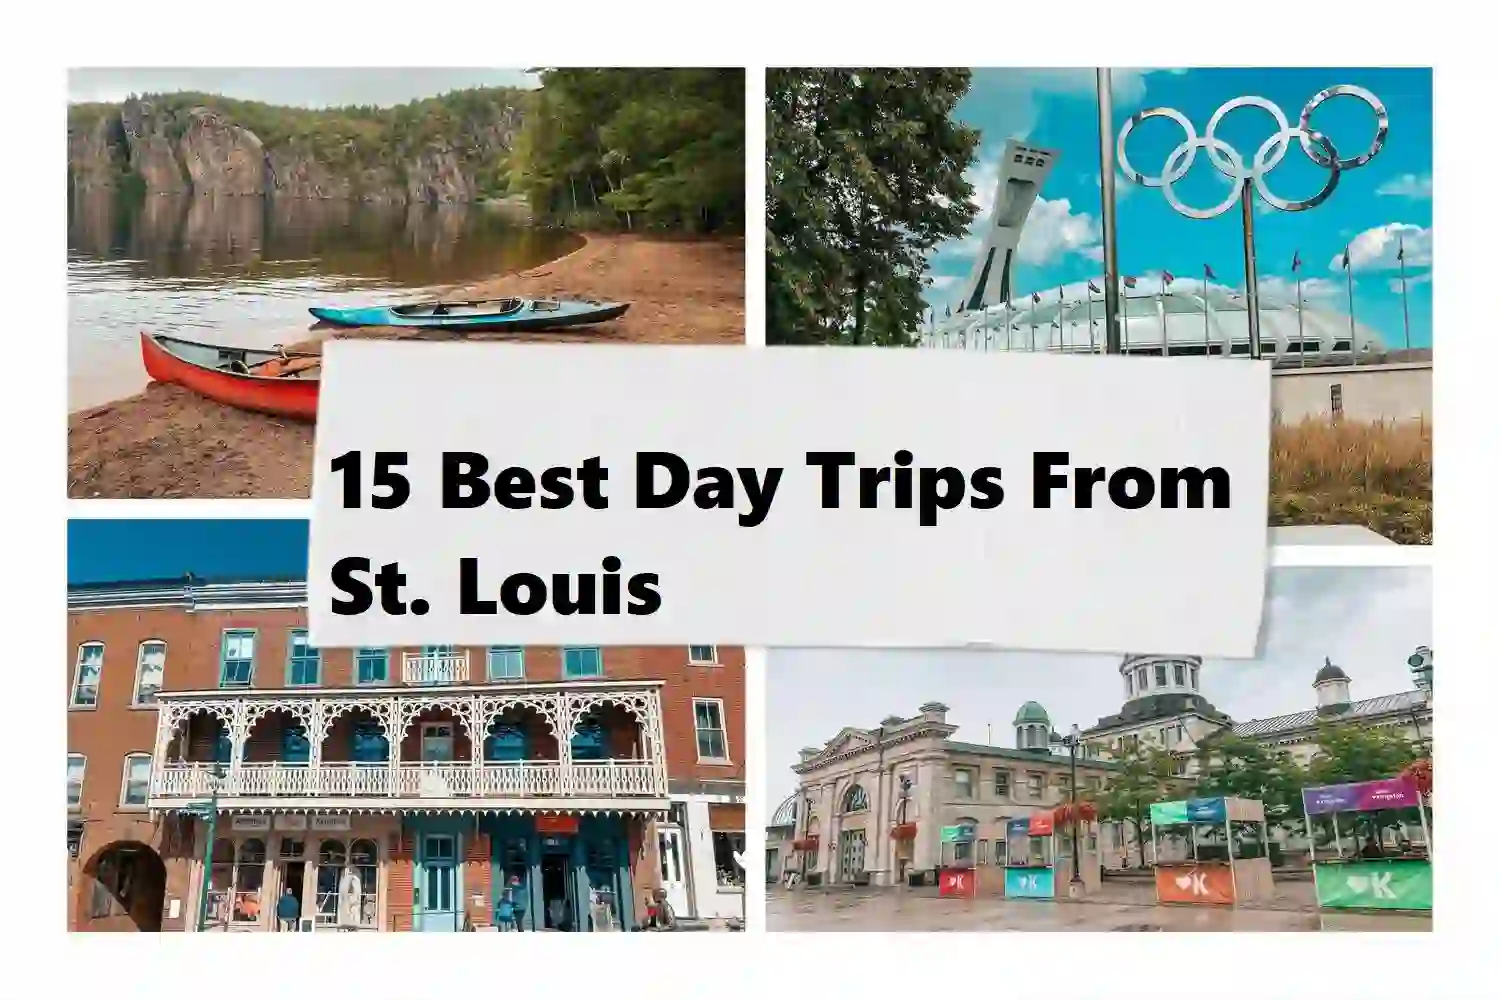 15 Best Day Trips From St. Louis